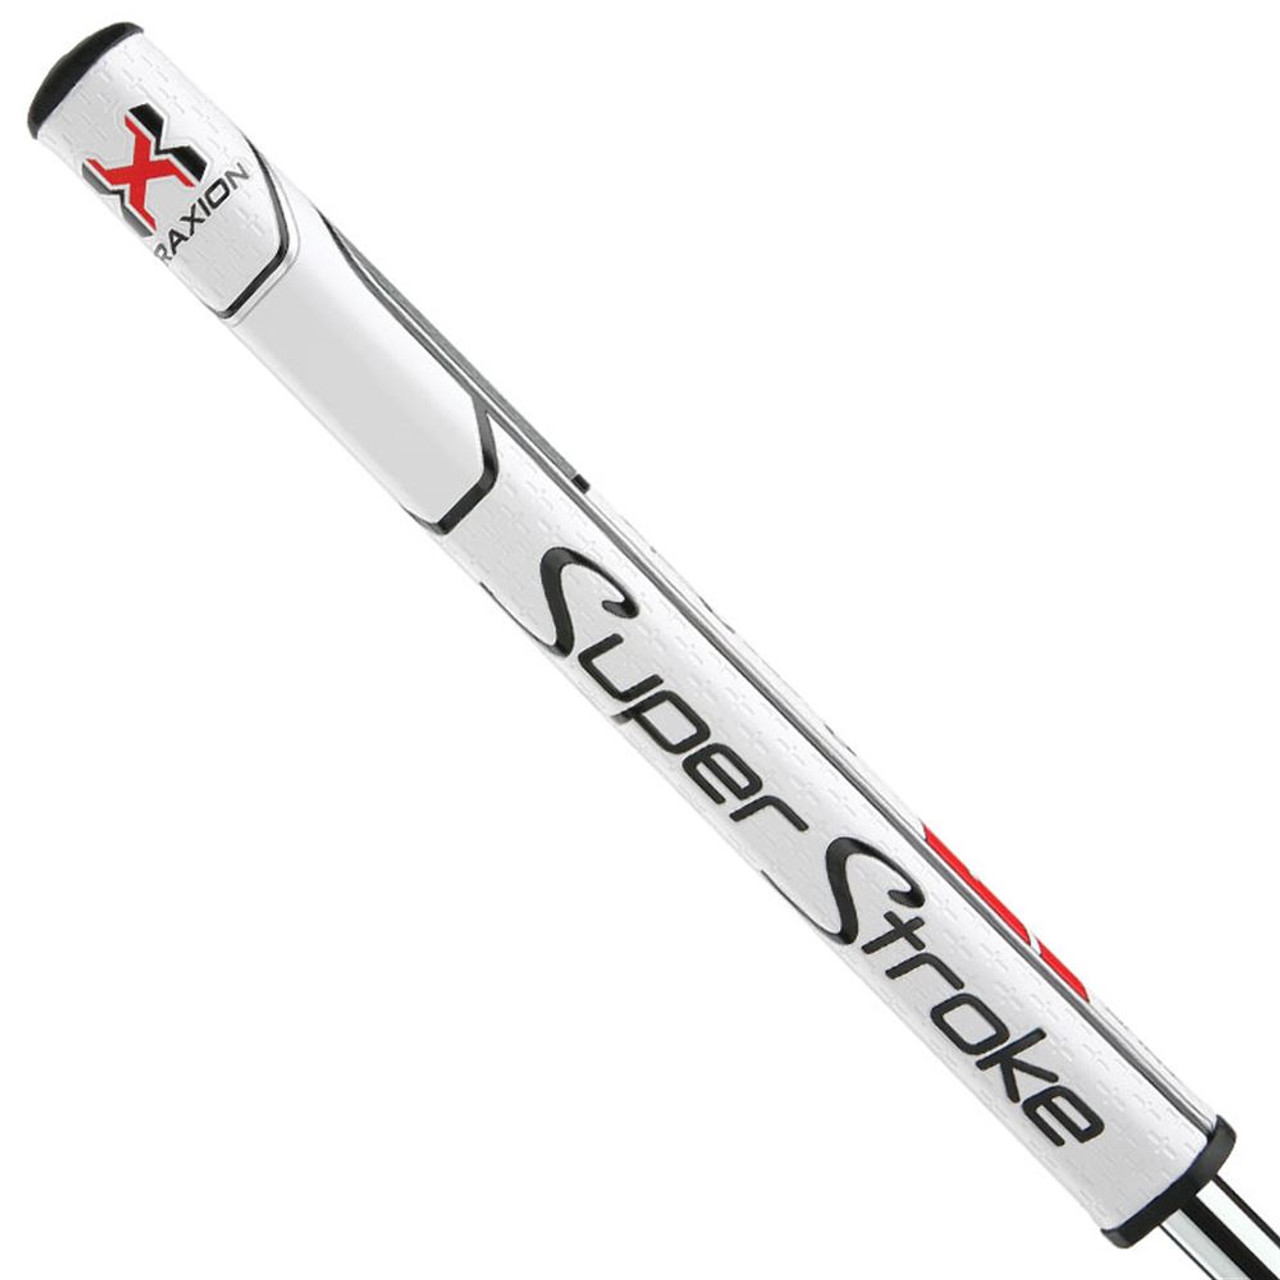 Super Stroke Traxion Tour Putter Grips - GolfWorks Canada